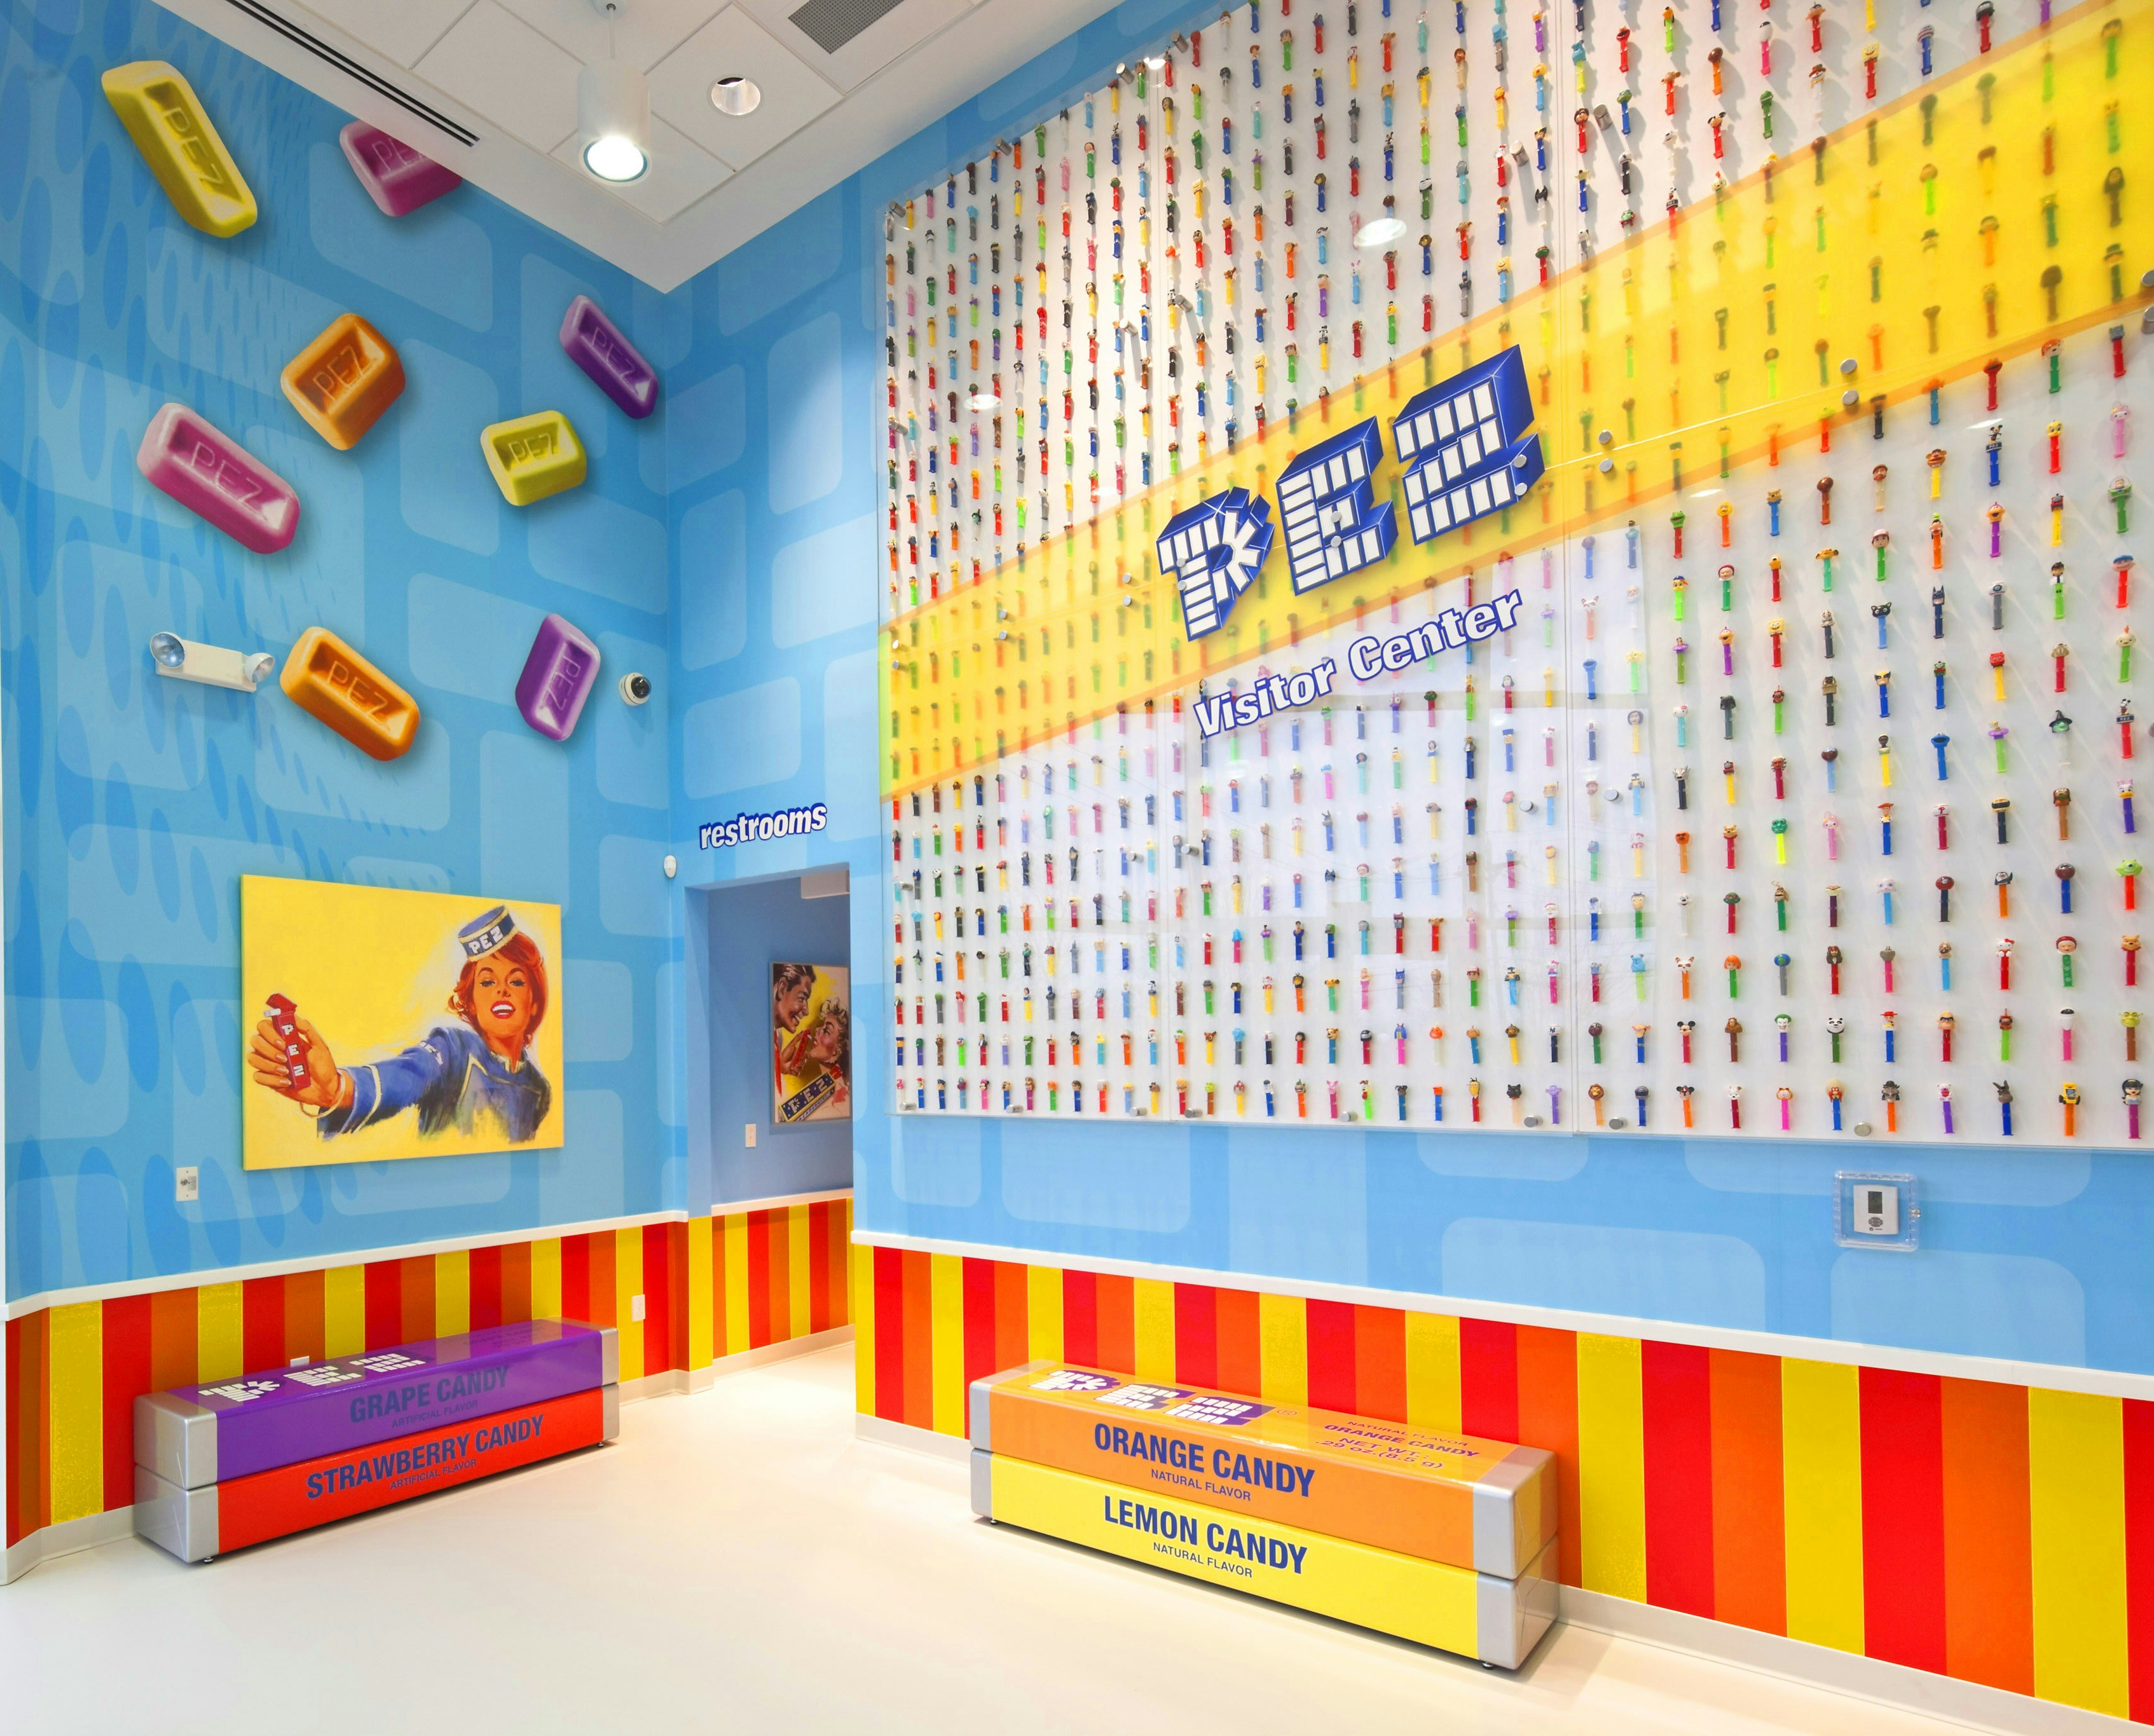 Colorful PEZ display on the wall at the visitor center of the PEZ factory